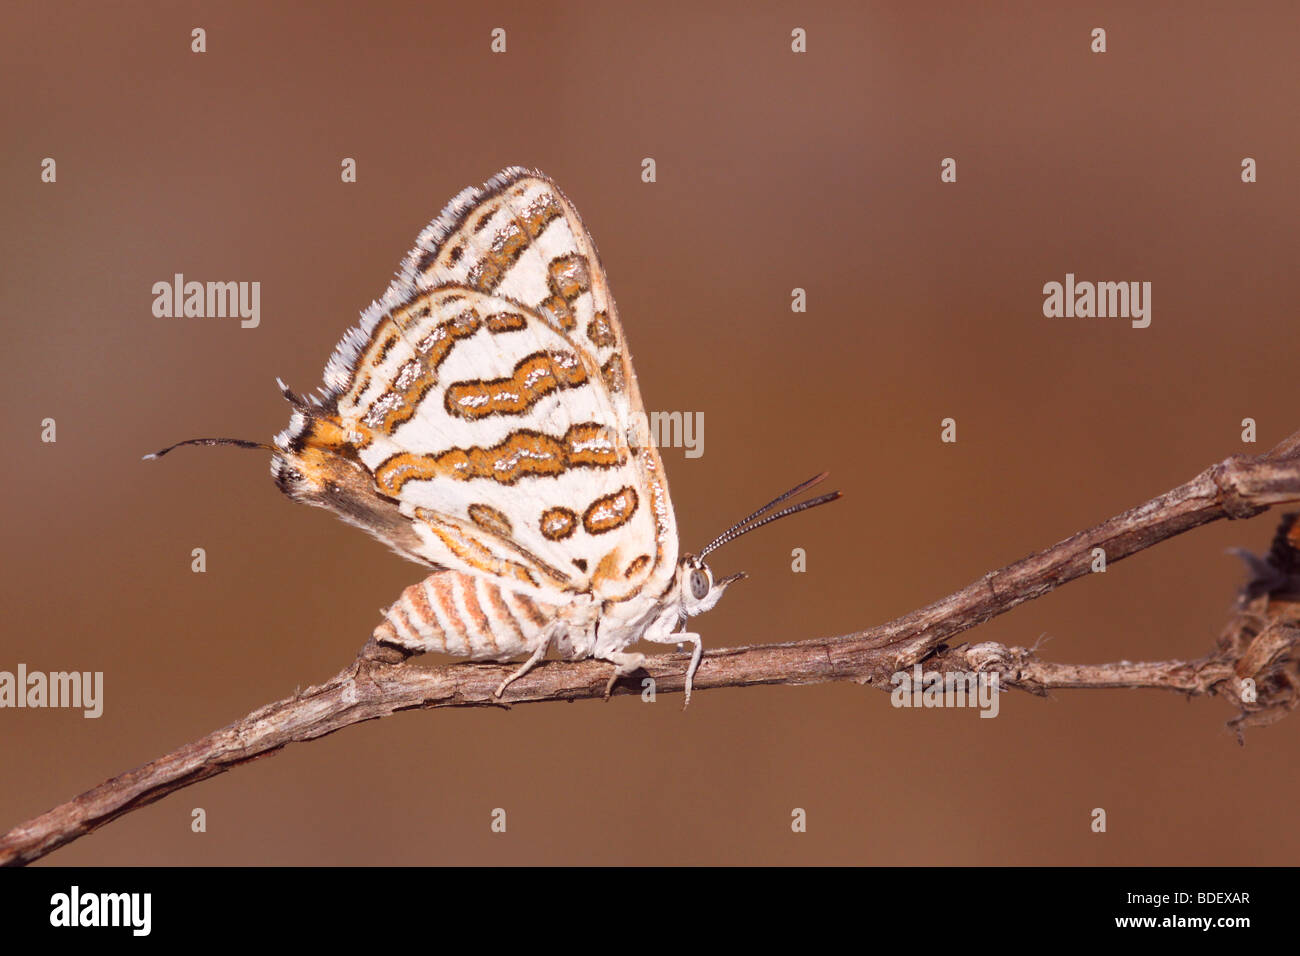 The Tawny Silverline, Apharitis acamus is a species of lycaenid or blue butterfly found in Asia and North Africa. Stock Photo